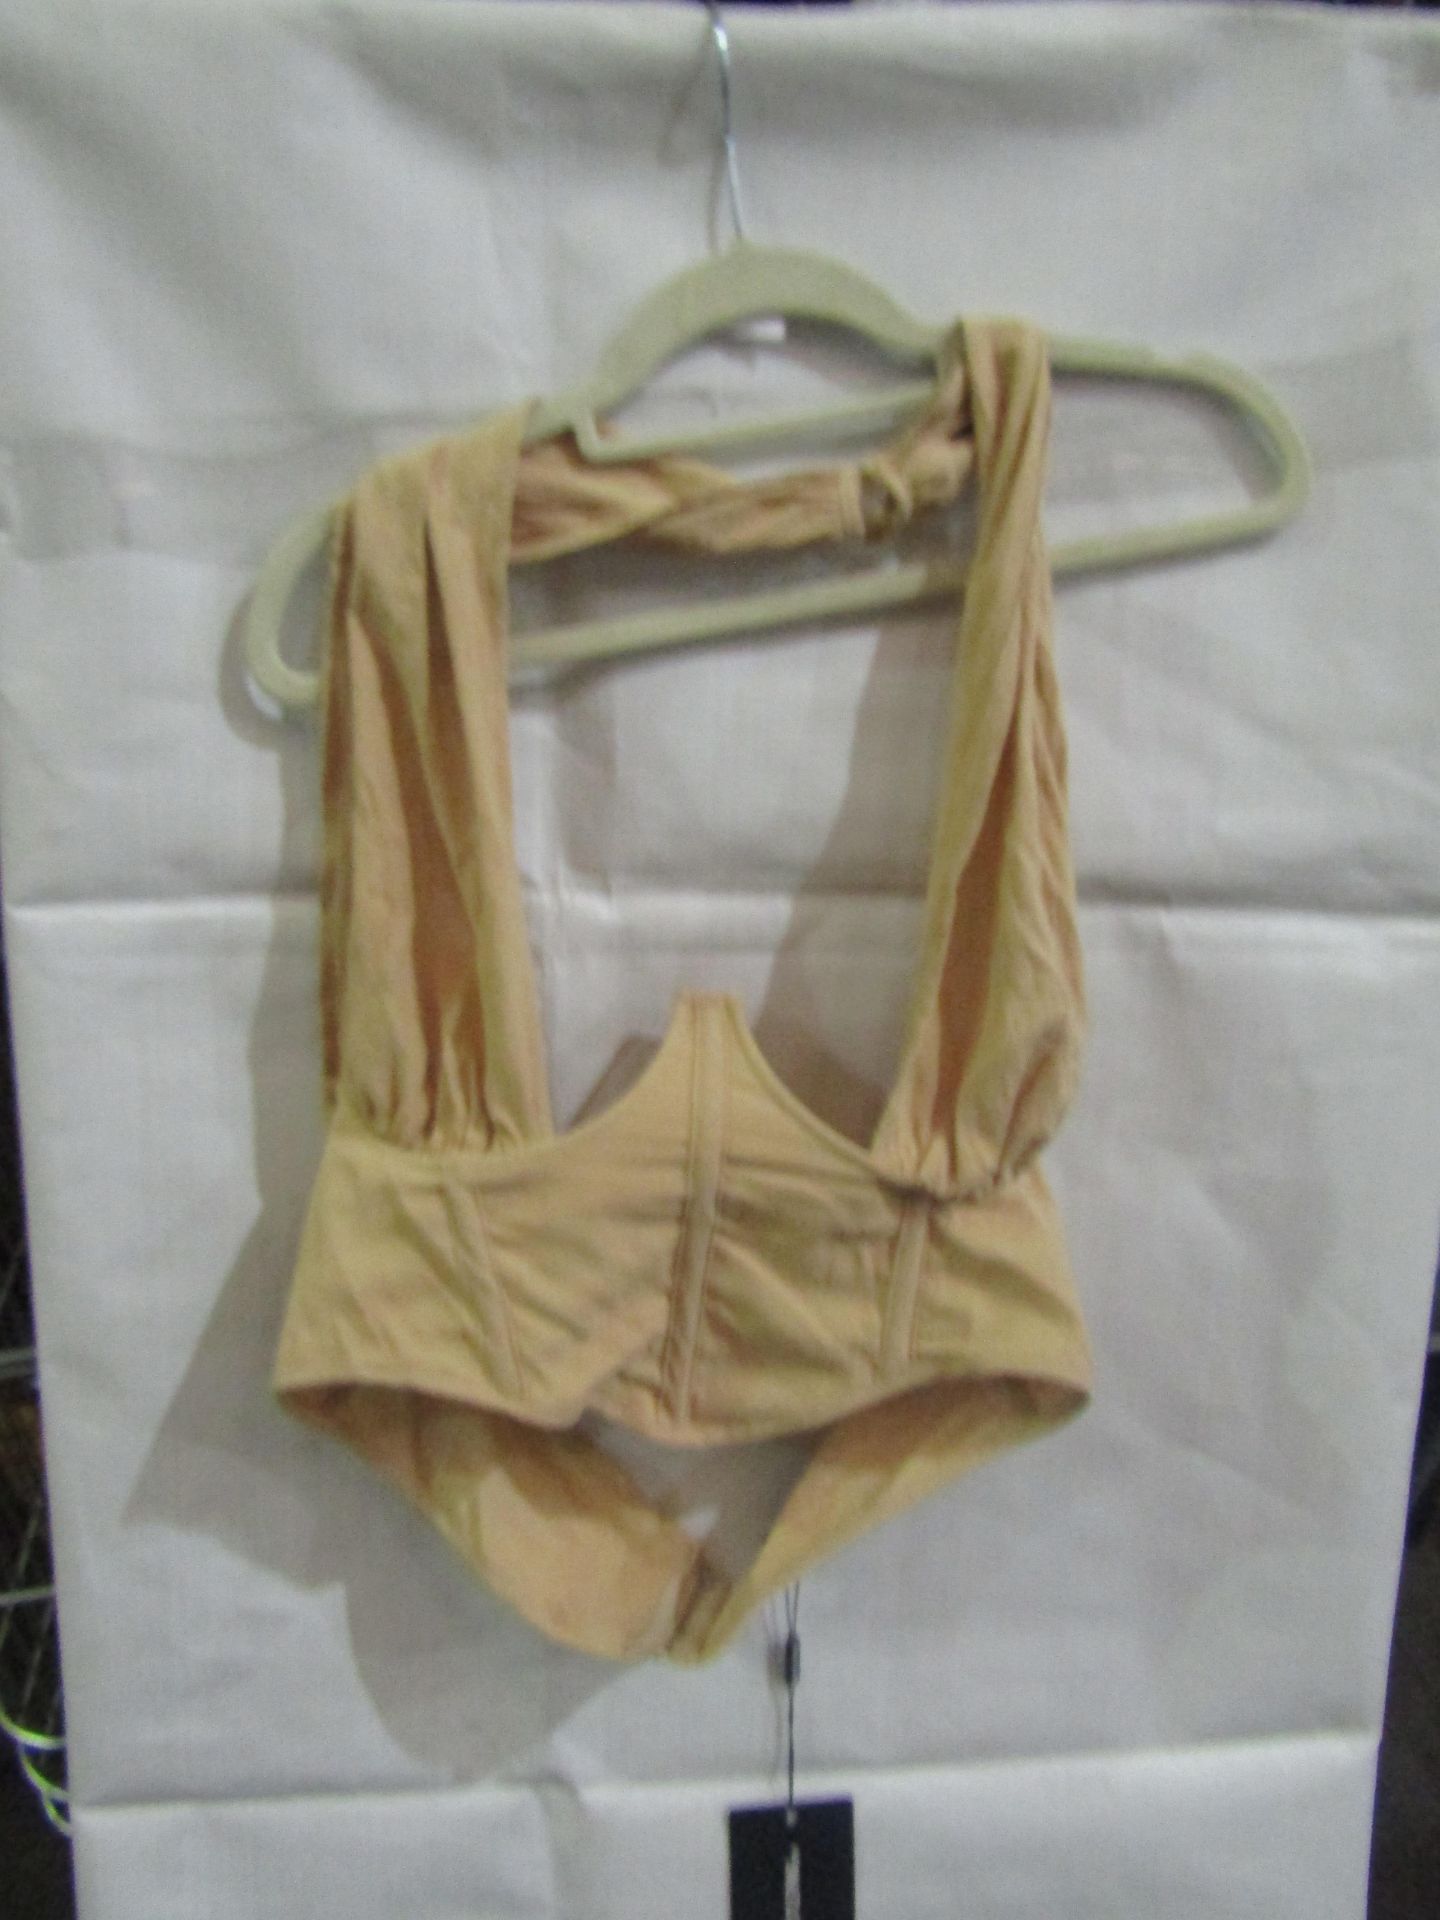 4x Pretty Little Thing Oatmeal Linen Look Cross Front Corset- Size 14, New & Packaged.